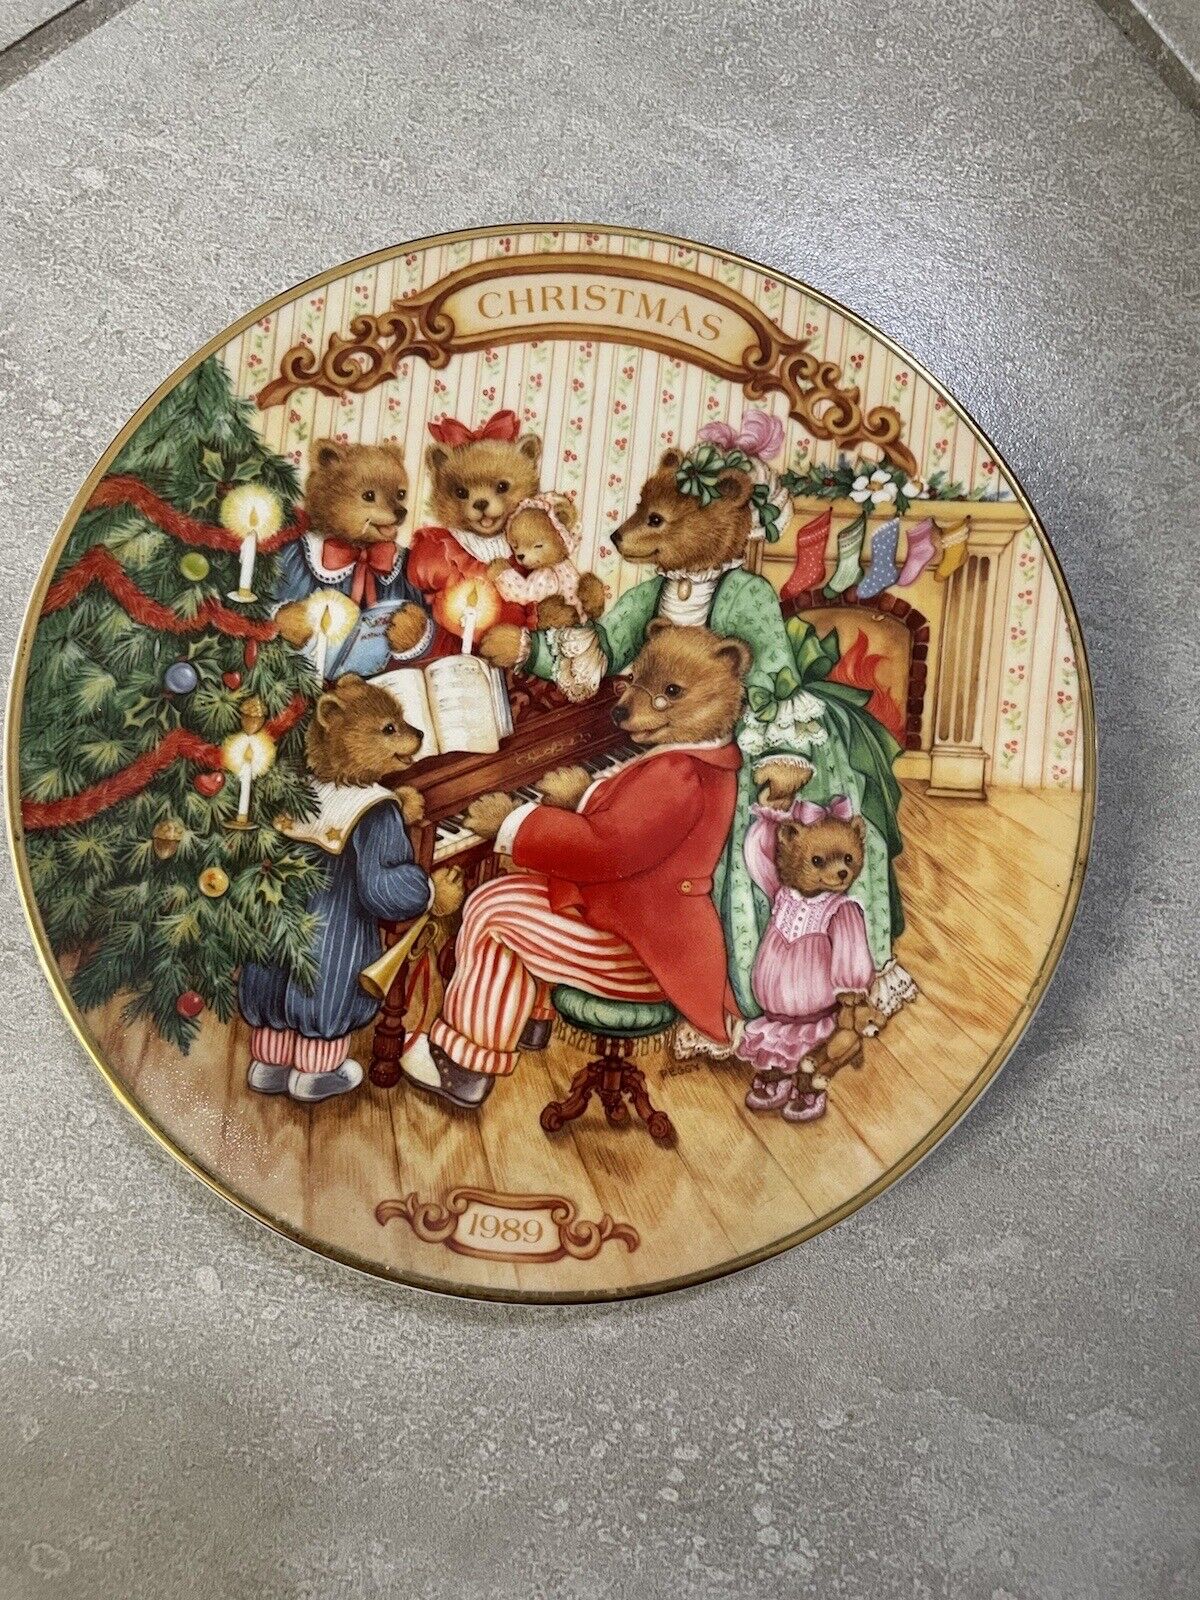 1989 AVON Together For Christmas Plate Collectible Porcelain 22K Gold Trim